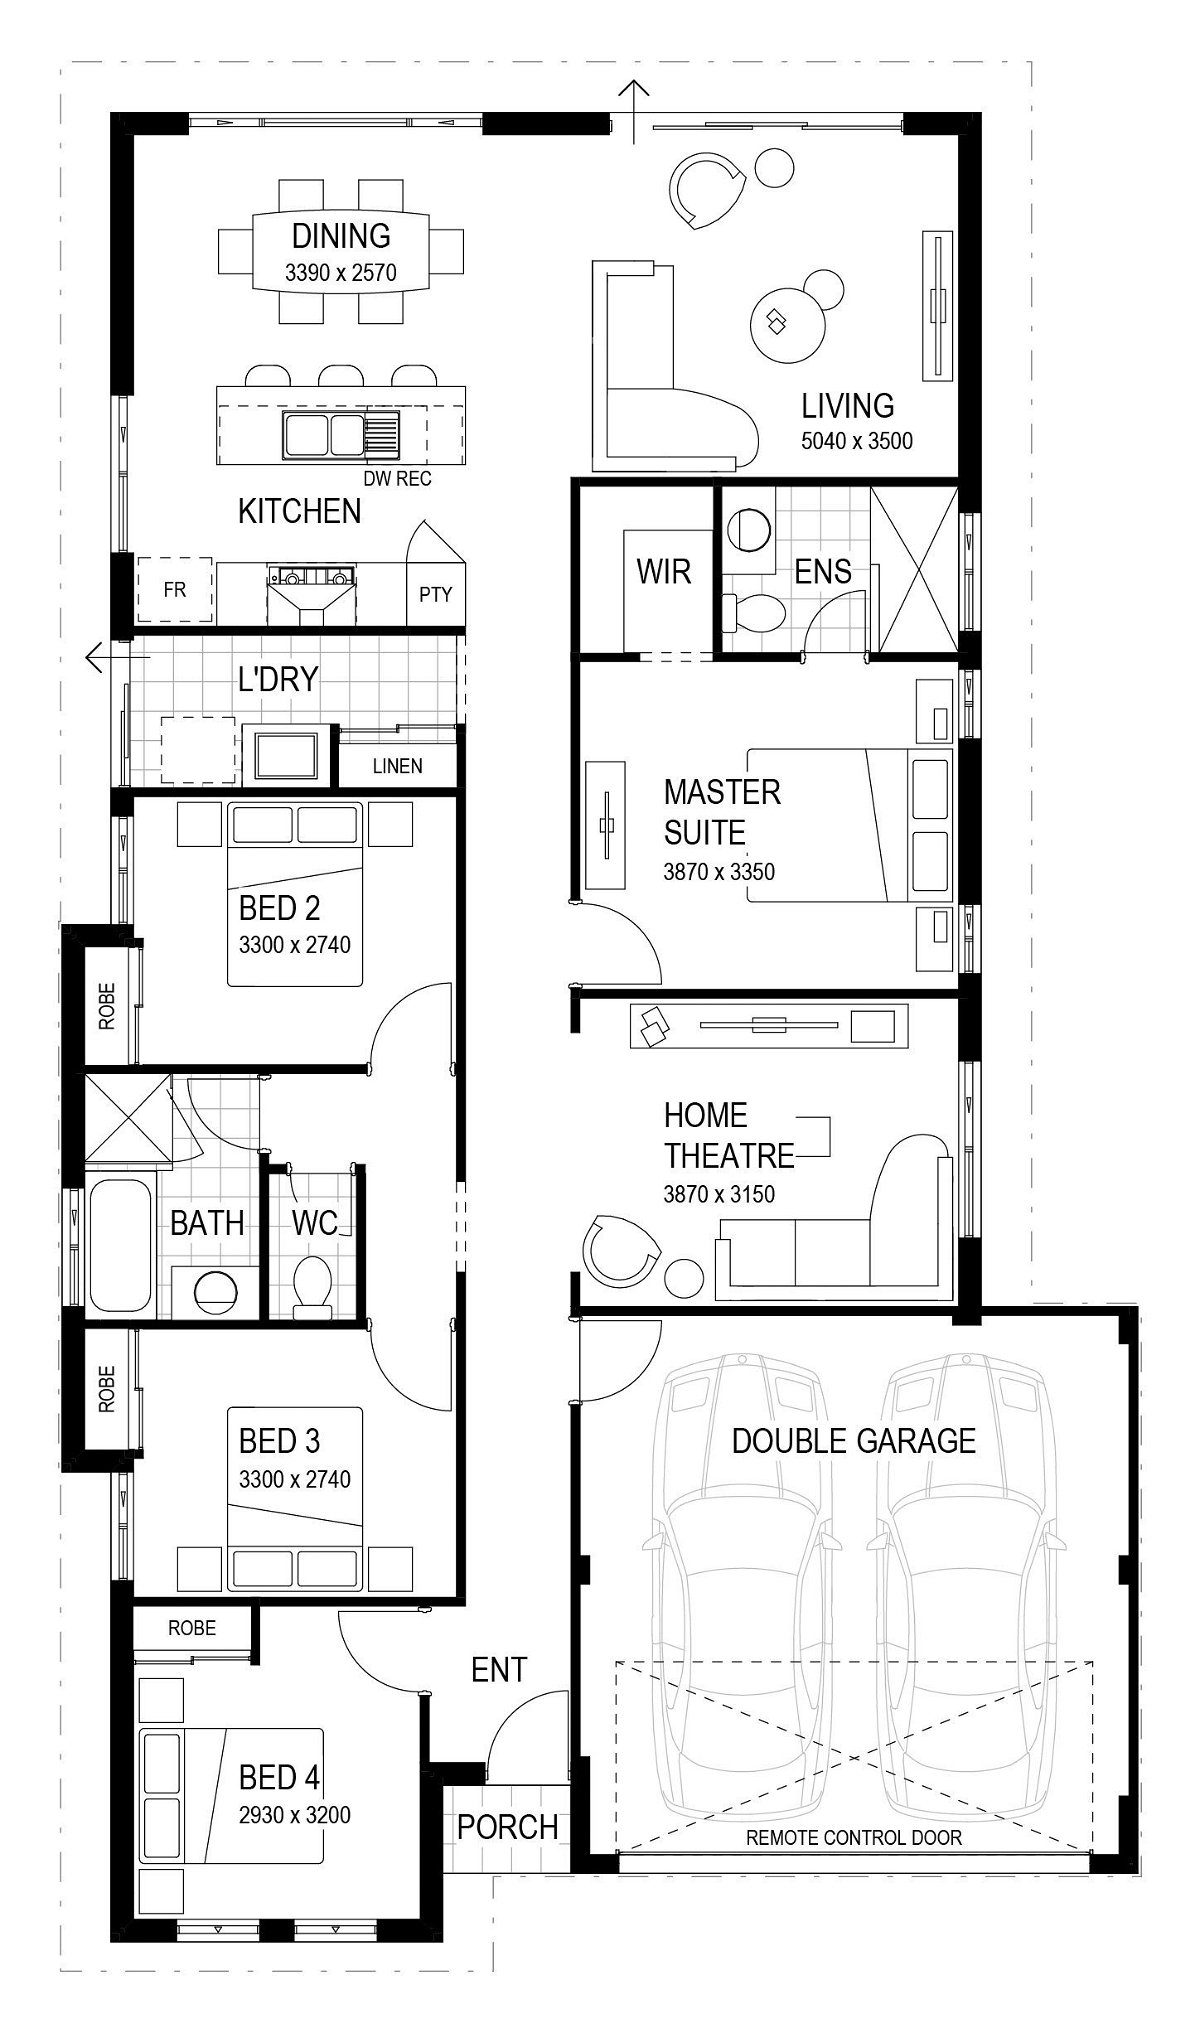 Wa Country Builders - The Independence - Floorplan - 6842F023 2C0F 4F9C A6Fa F9Ca5Af9441F 6328P The20Independence 125